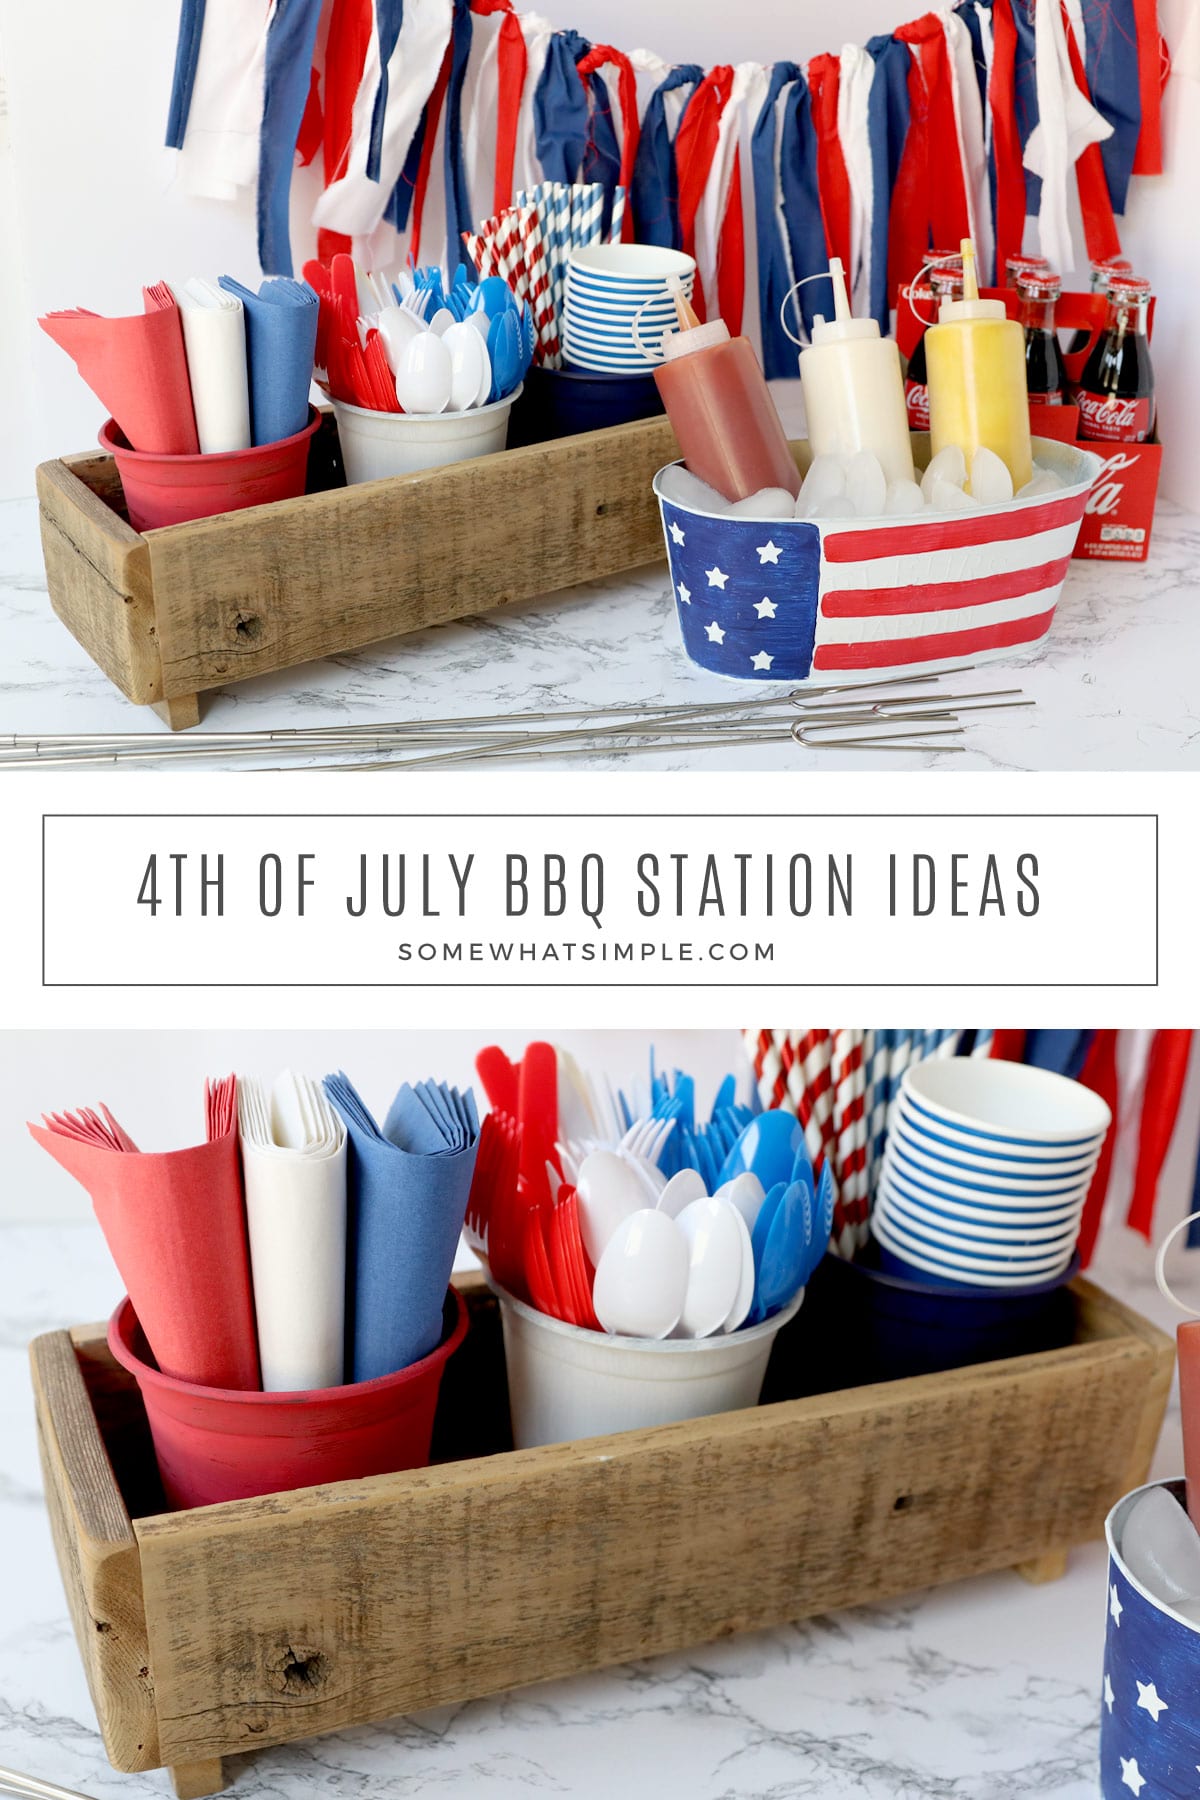 Spice up your Independence Day celebrations with a 4th of July BBQ station that's simple to create and a whole lot of fun to eat! via @somewhatsimple